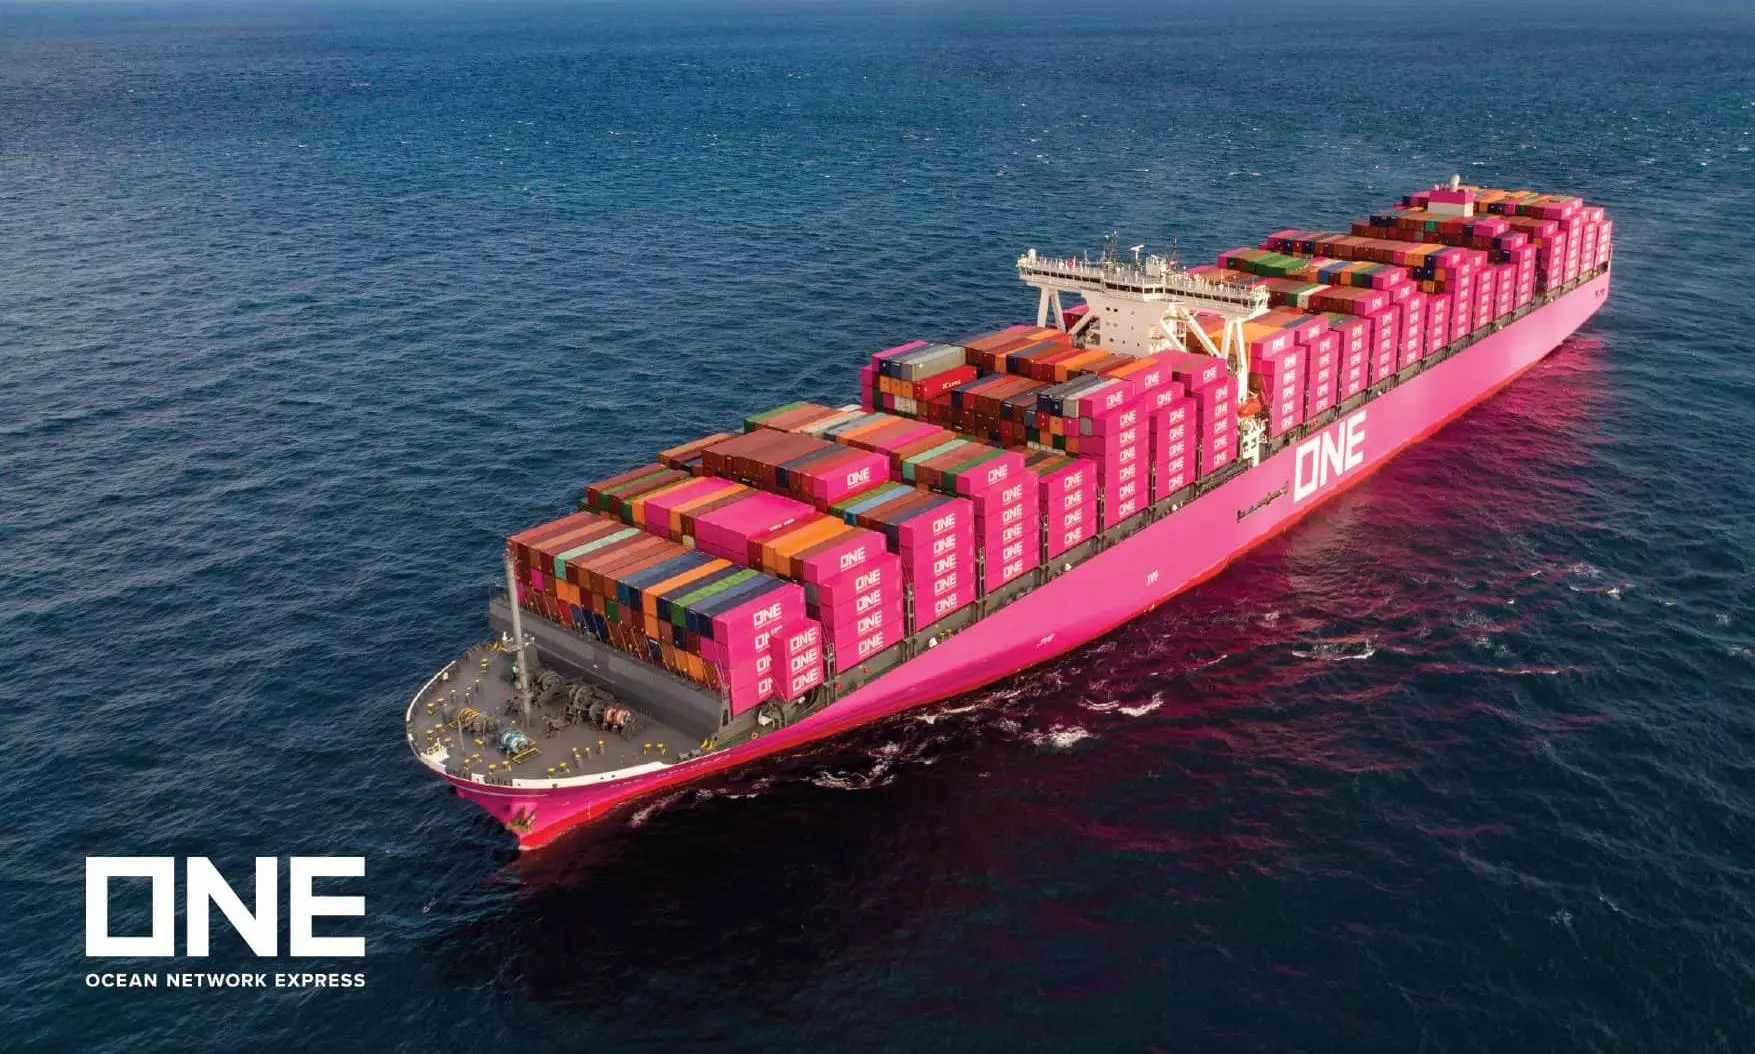 ONE to receive 10 new vessels with 13,700 TEU capacity by 2025, 26